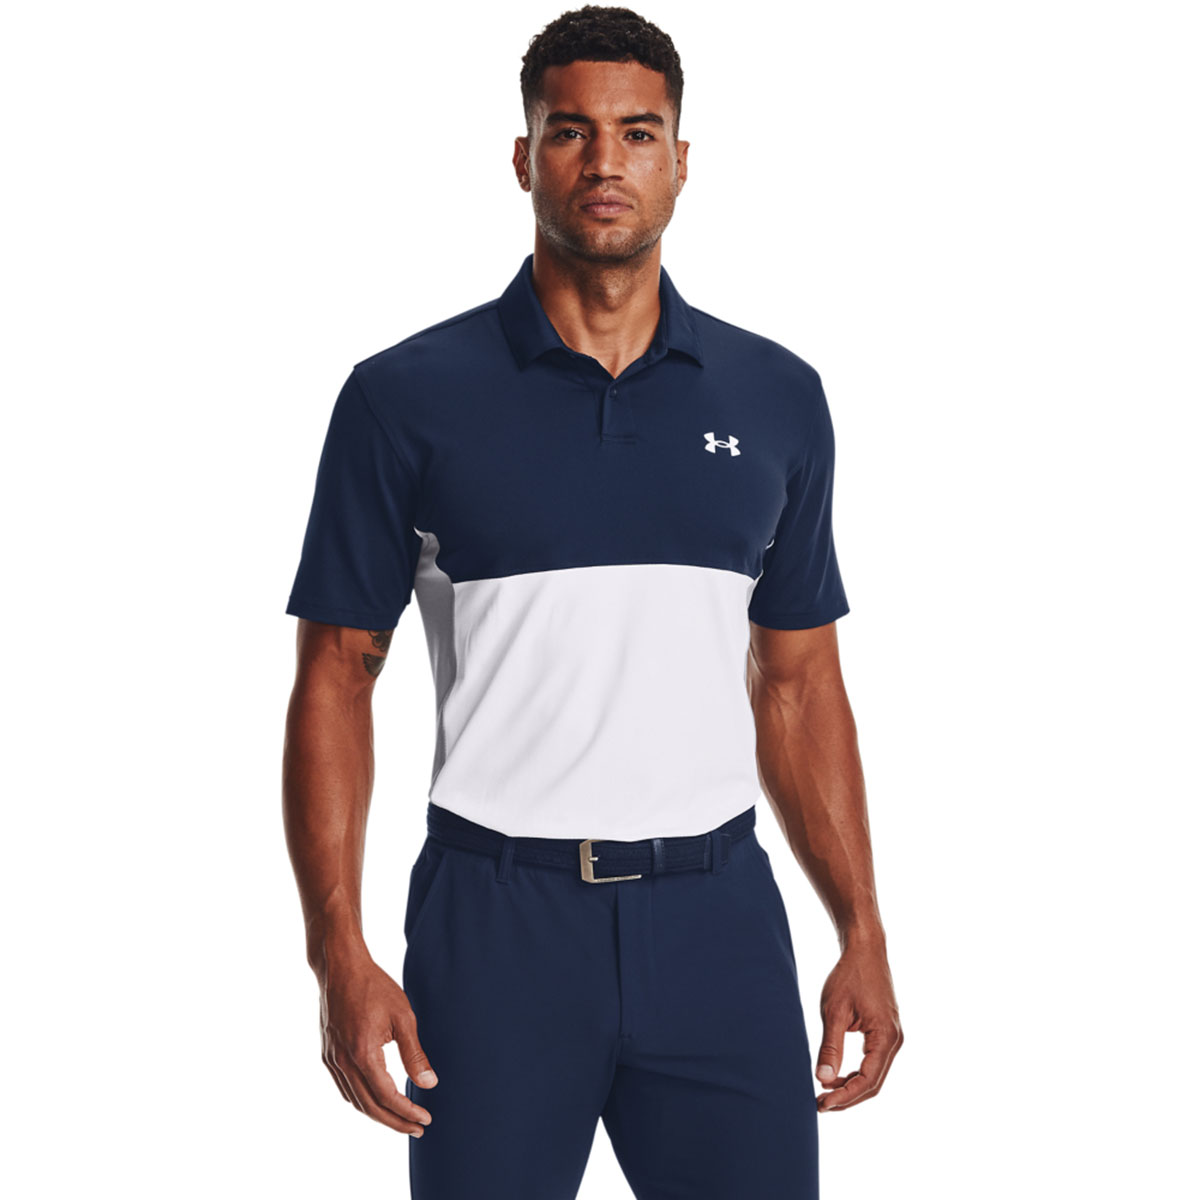 Under Armour Men's Performance Blocked Stretch Golf Polo Shirt